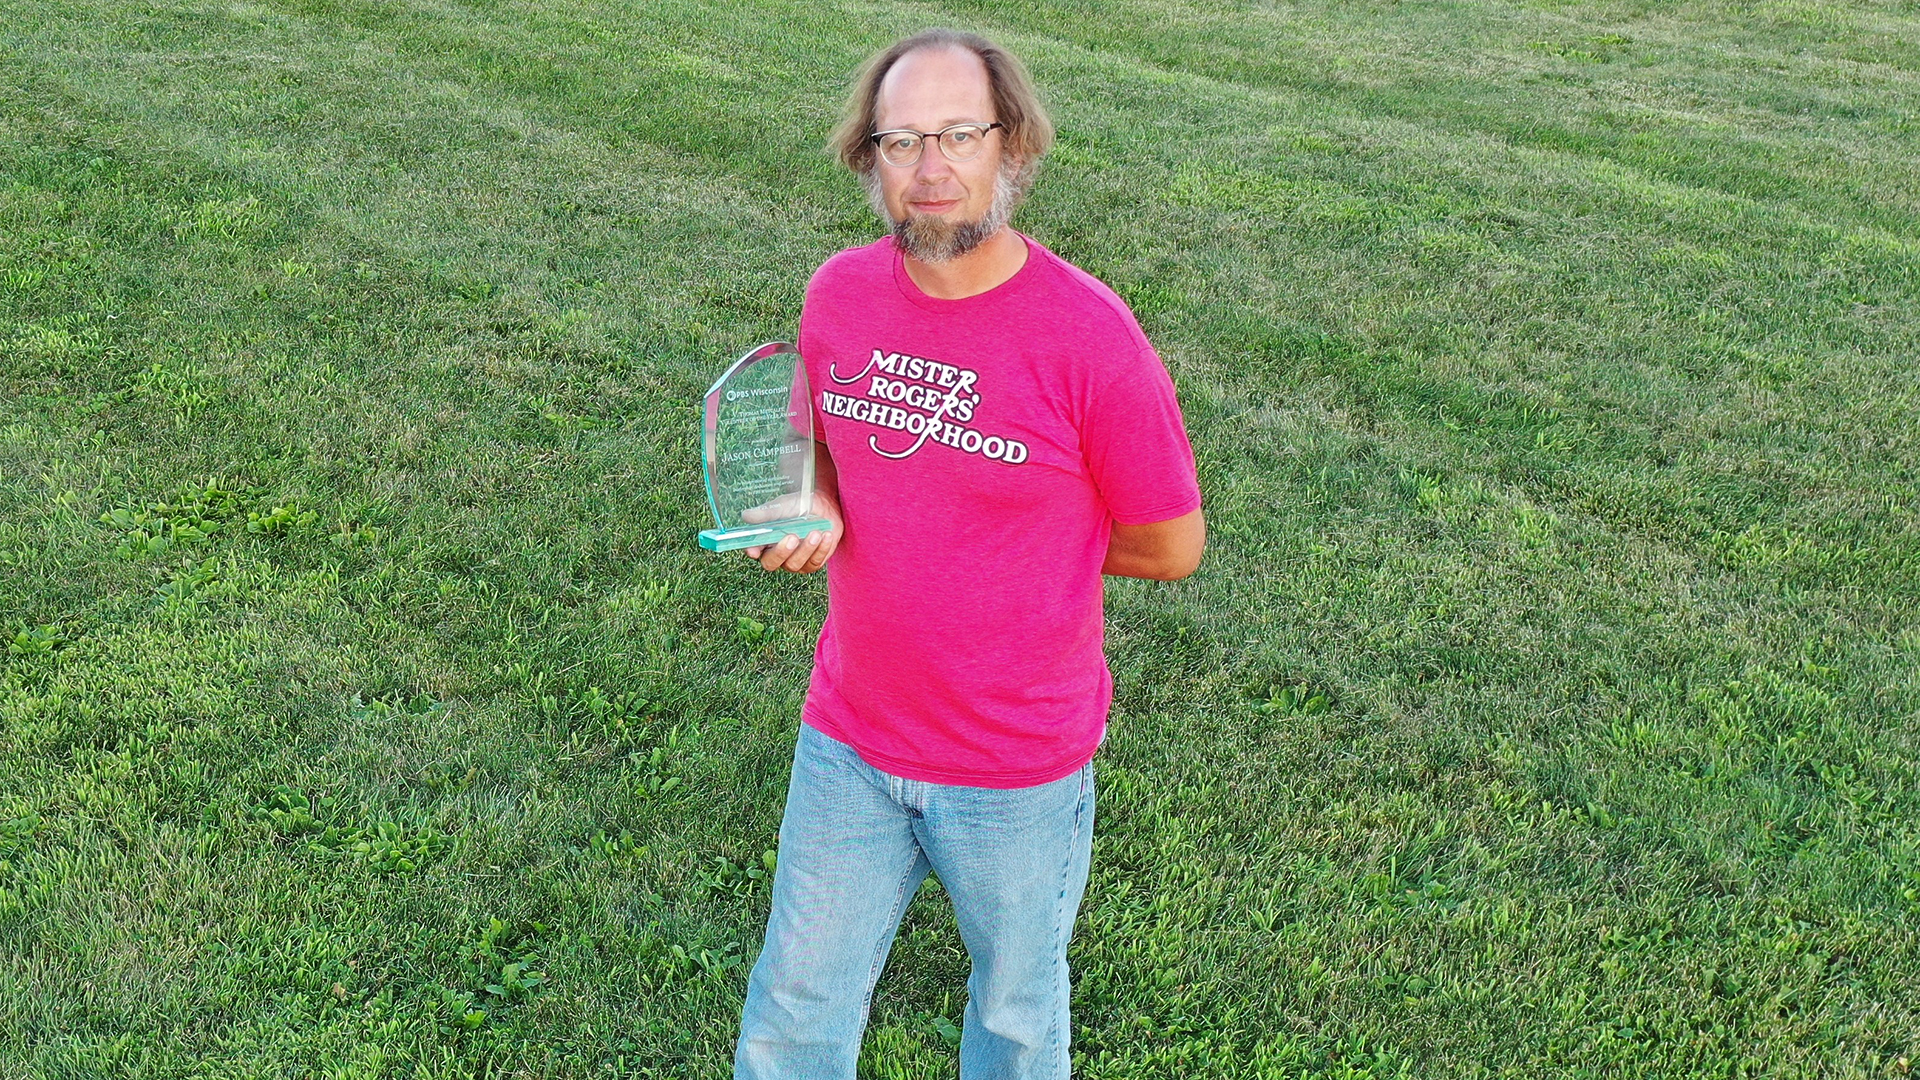 Jason Campbell stands in a field wearing a Mister Rogers' Neighborhood red t-shirt and jeans, holding his 2020 Volunteer of the Year trophy/award